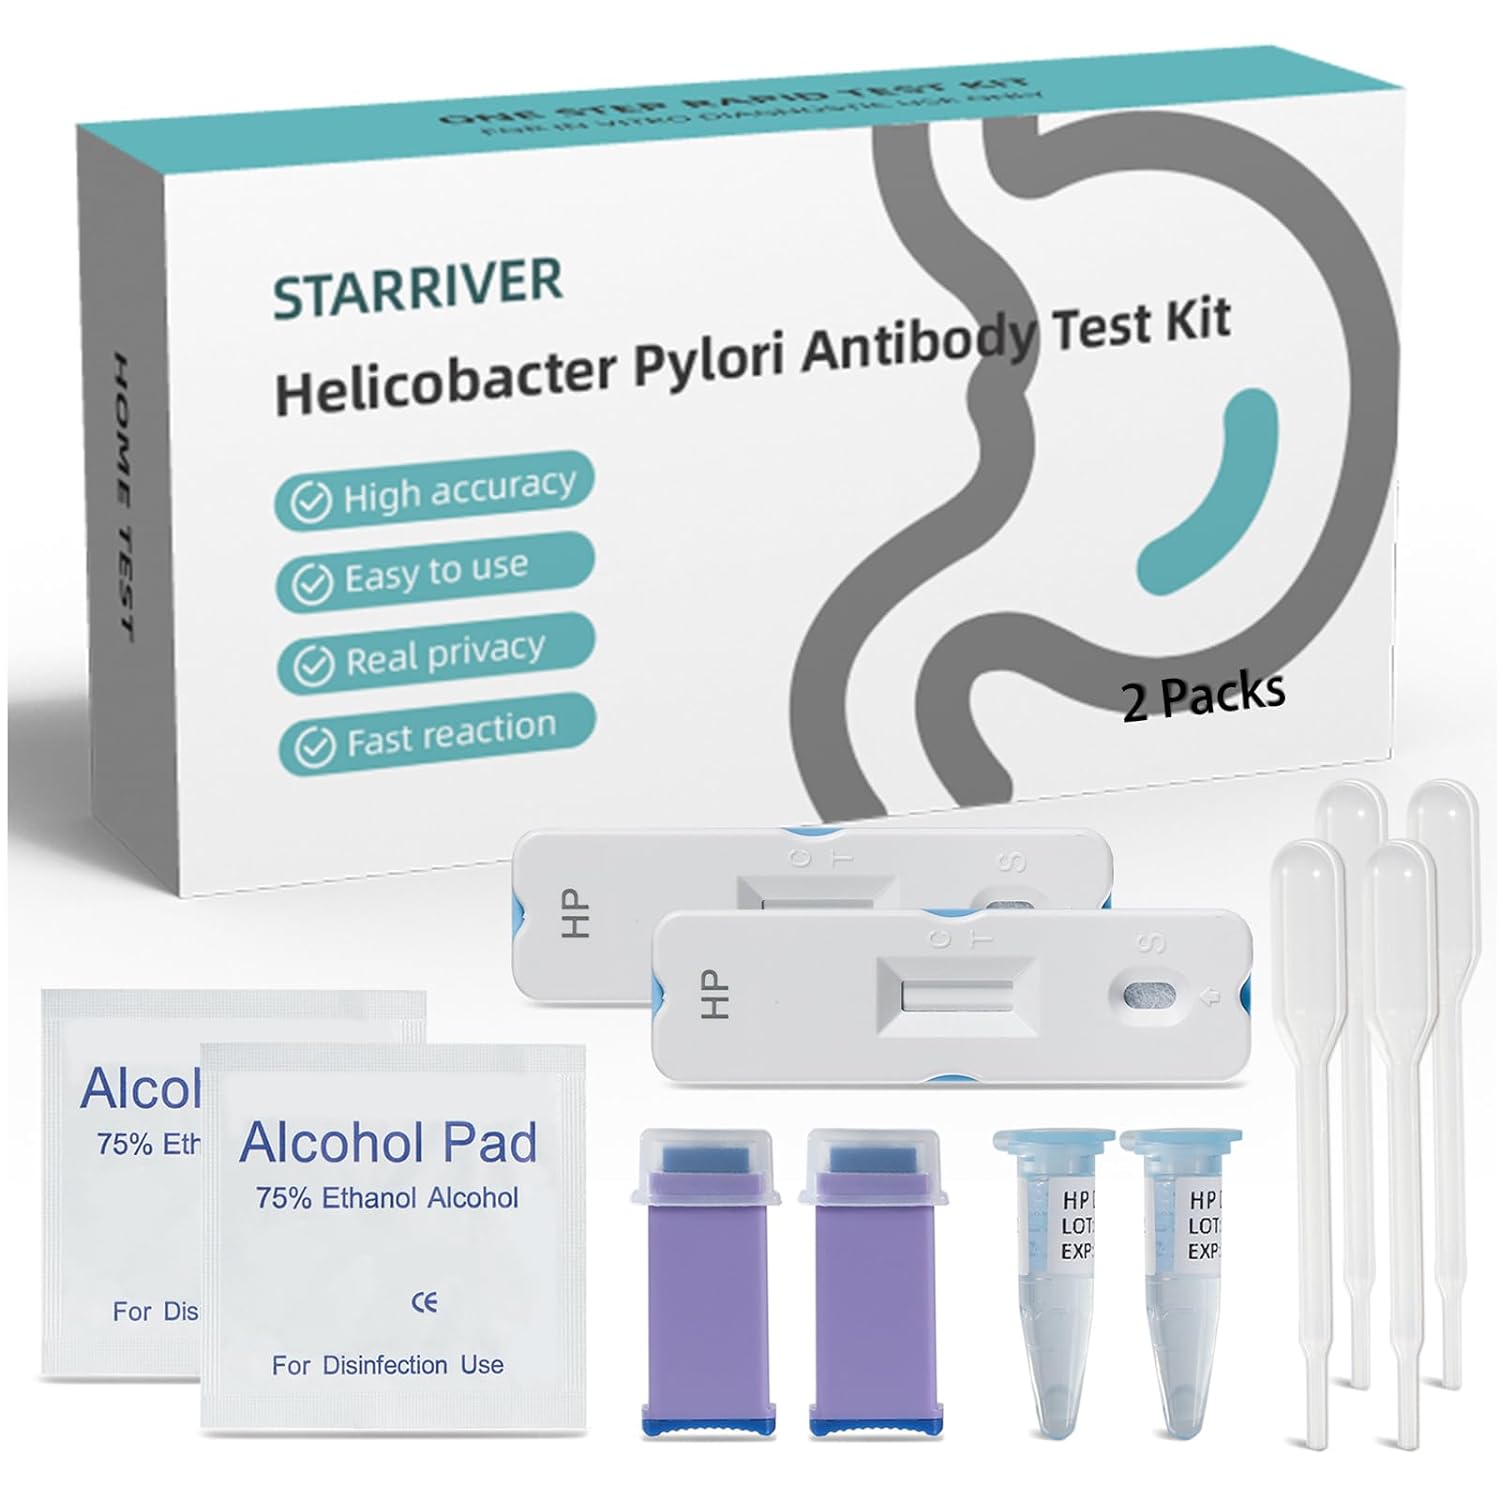 STARRIVER H Pylori Test Kit, Helicobacter Pylori Test Kits at Home - 2 Tests H. Pylori Test Kits, h-Pylori Self-Test for Home Use, Easy to Use, Result in 15mins